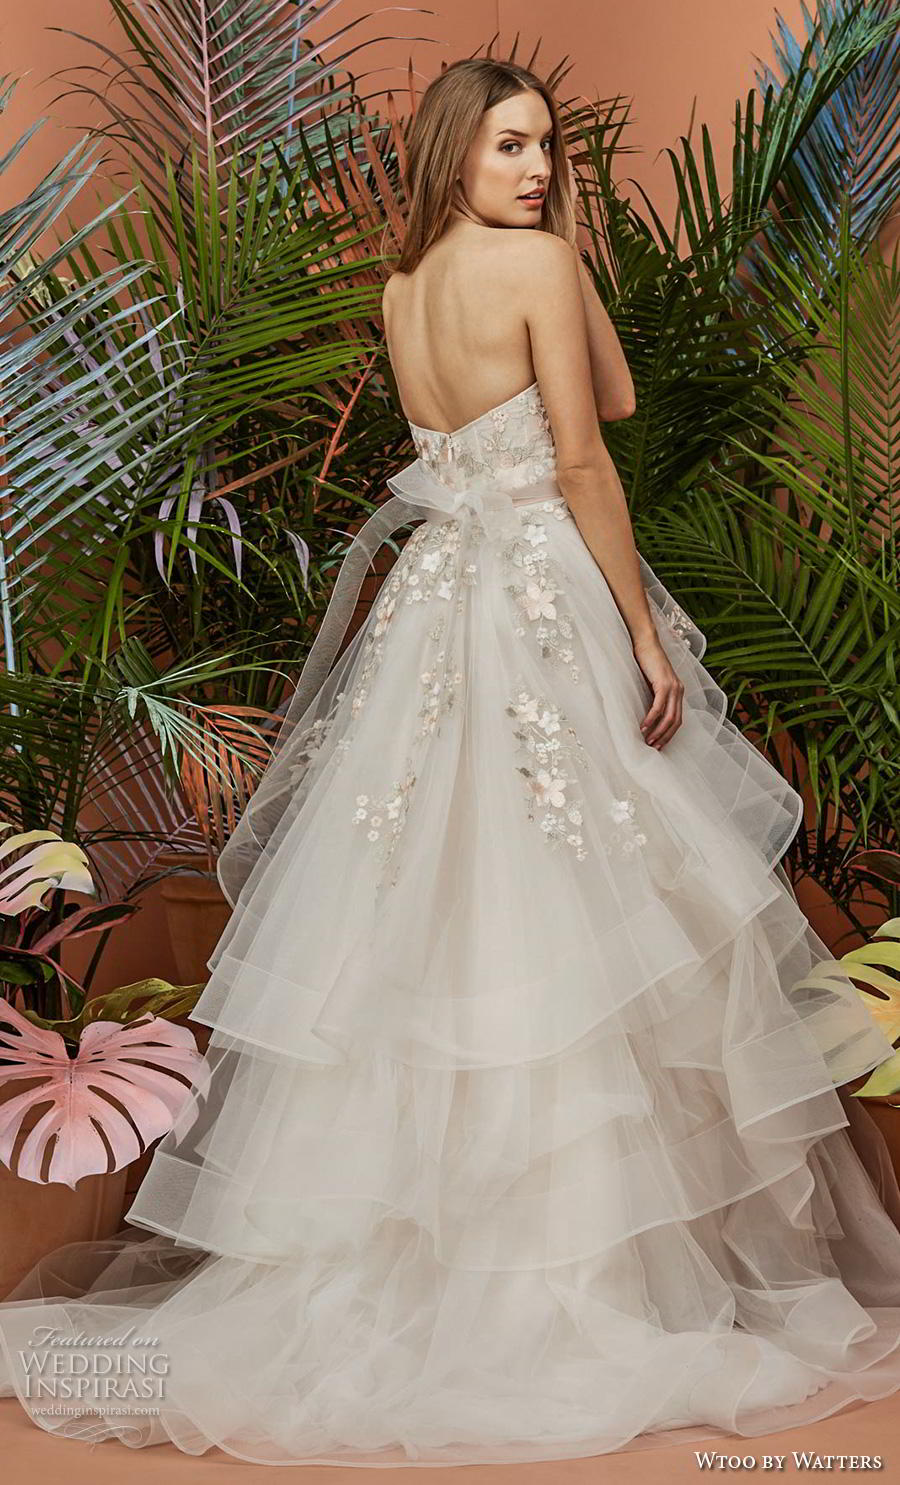 Wtoo by Watters Fall 2018 Wedding Dresses — “At First